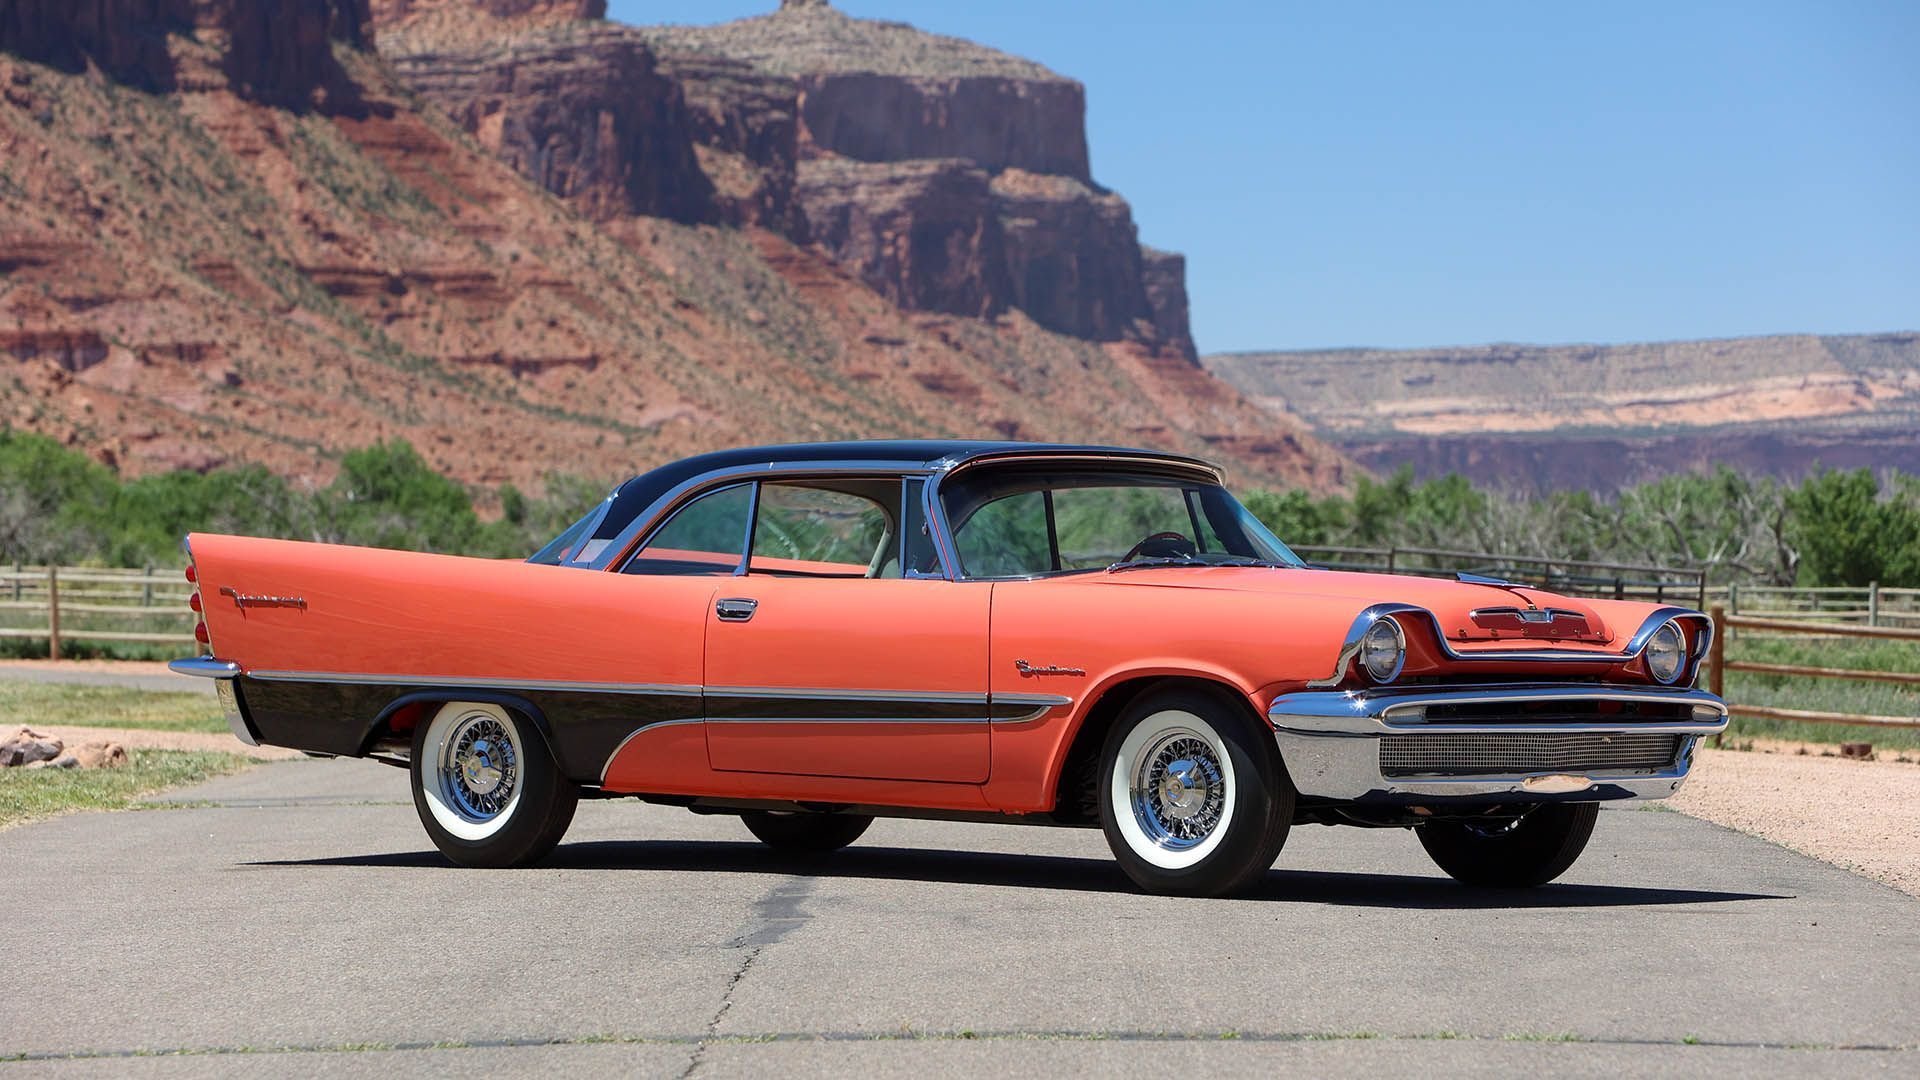 For Sale 1957 DeSoto Firesweep Sportsman Coupe